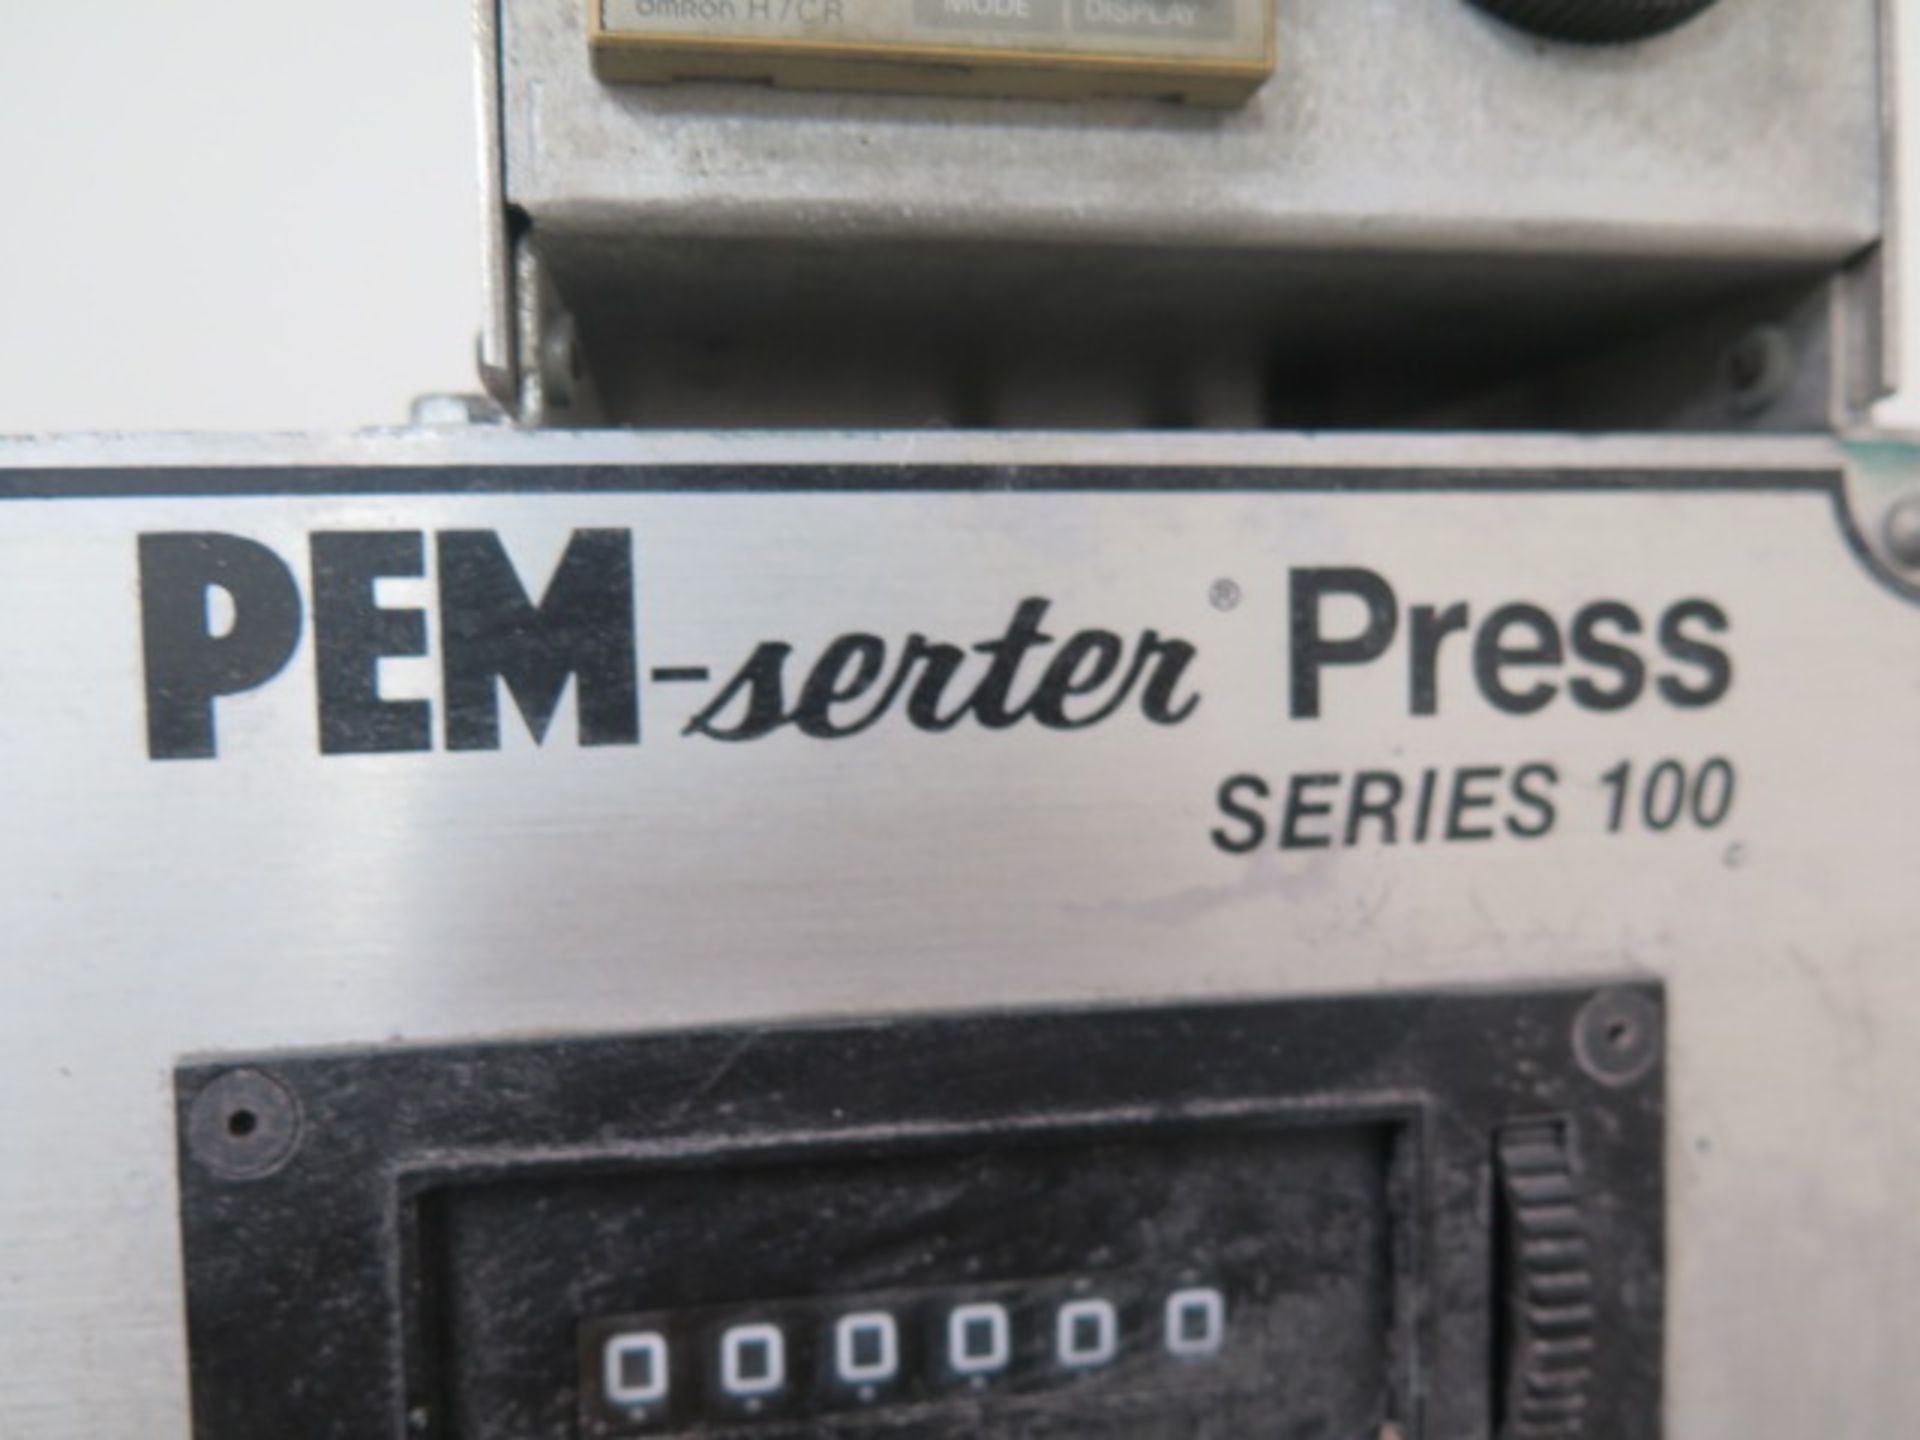 Pemserter Series 100 6-Ton x 12” Hardware Insertion Press s/n 100A-786, SOLD AS IS AND NO WARRANTY - Image 7 of 7